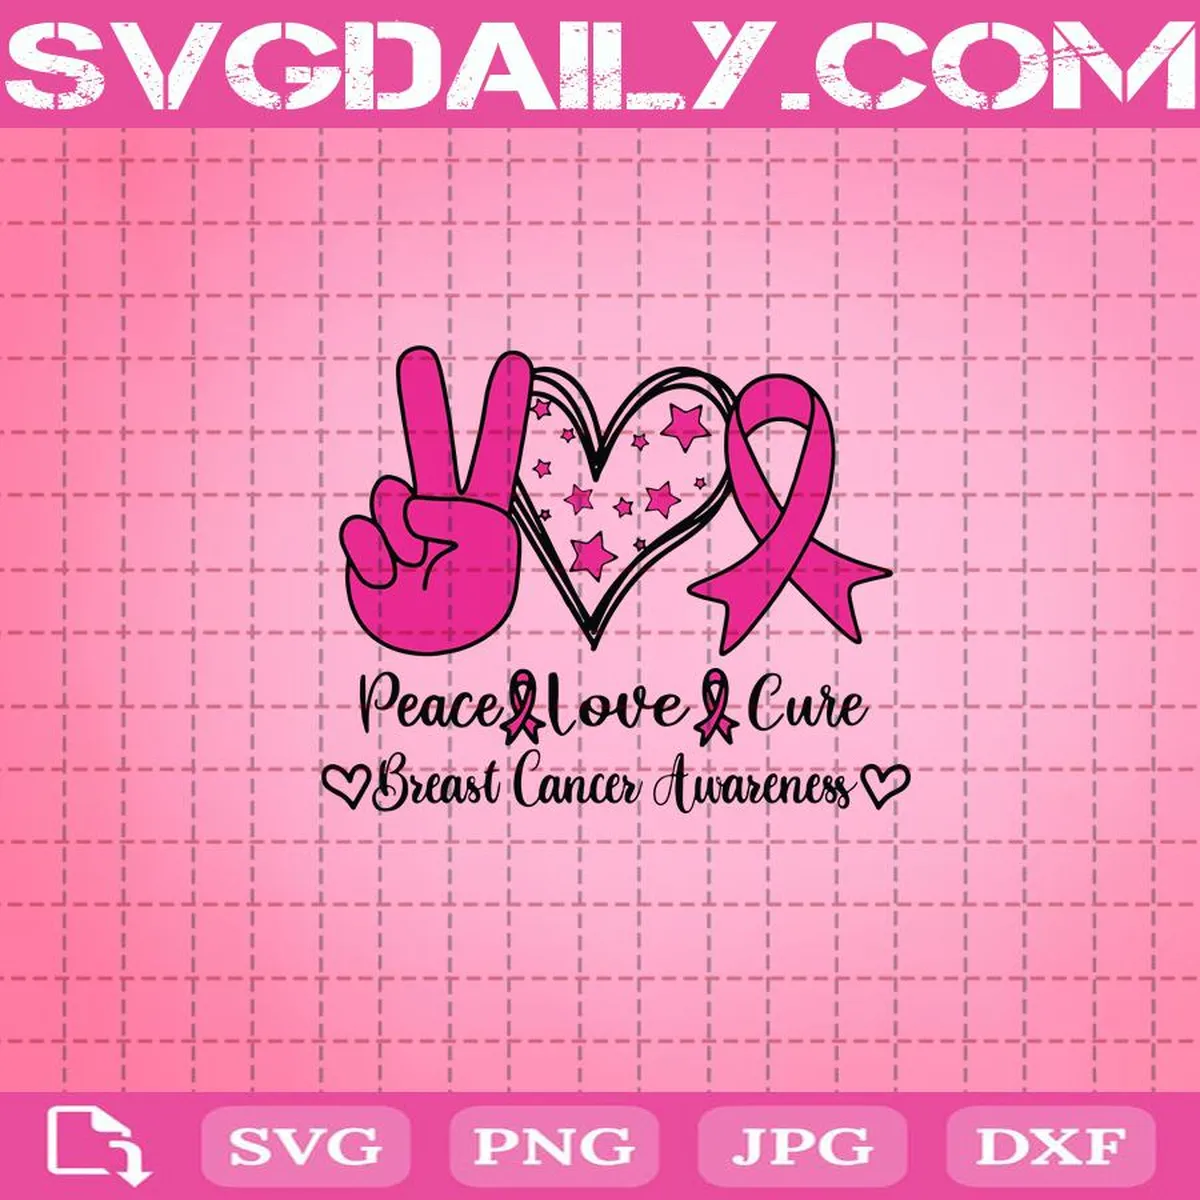 Peace Love Cure Svg, Peace Love Cure Breast Cancer Awareness Svg, Cancer Svg, Peace Love Cancer Awareness Svg